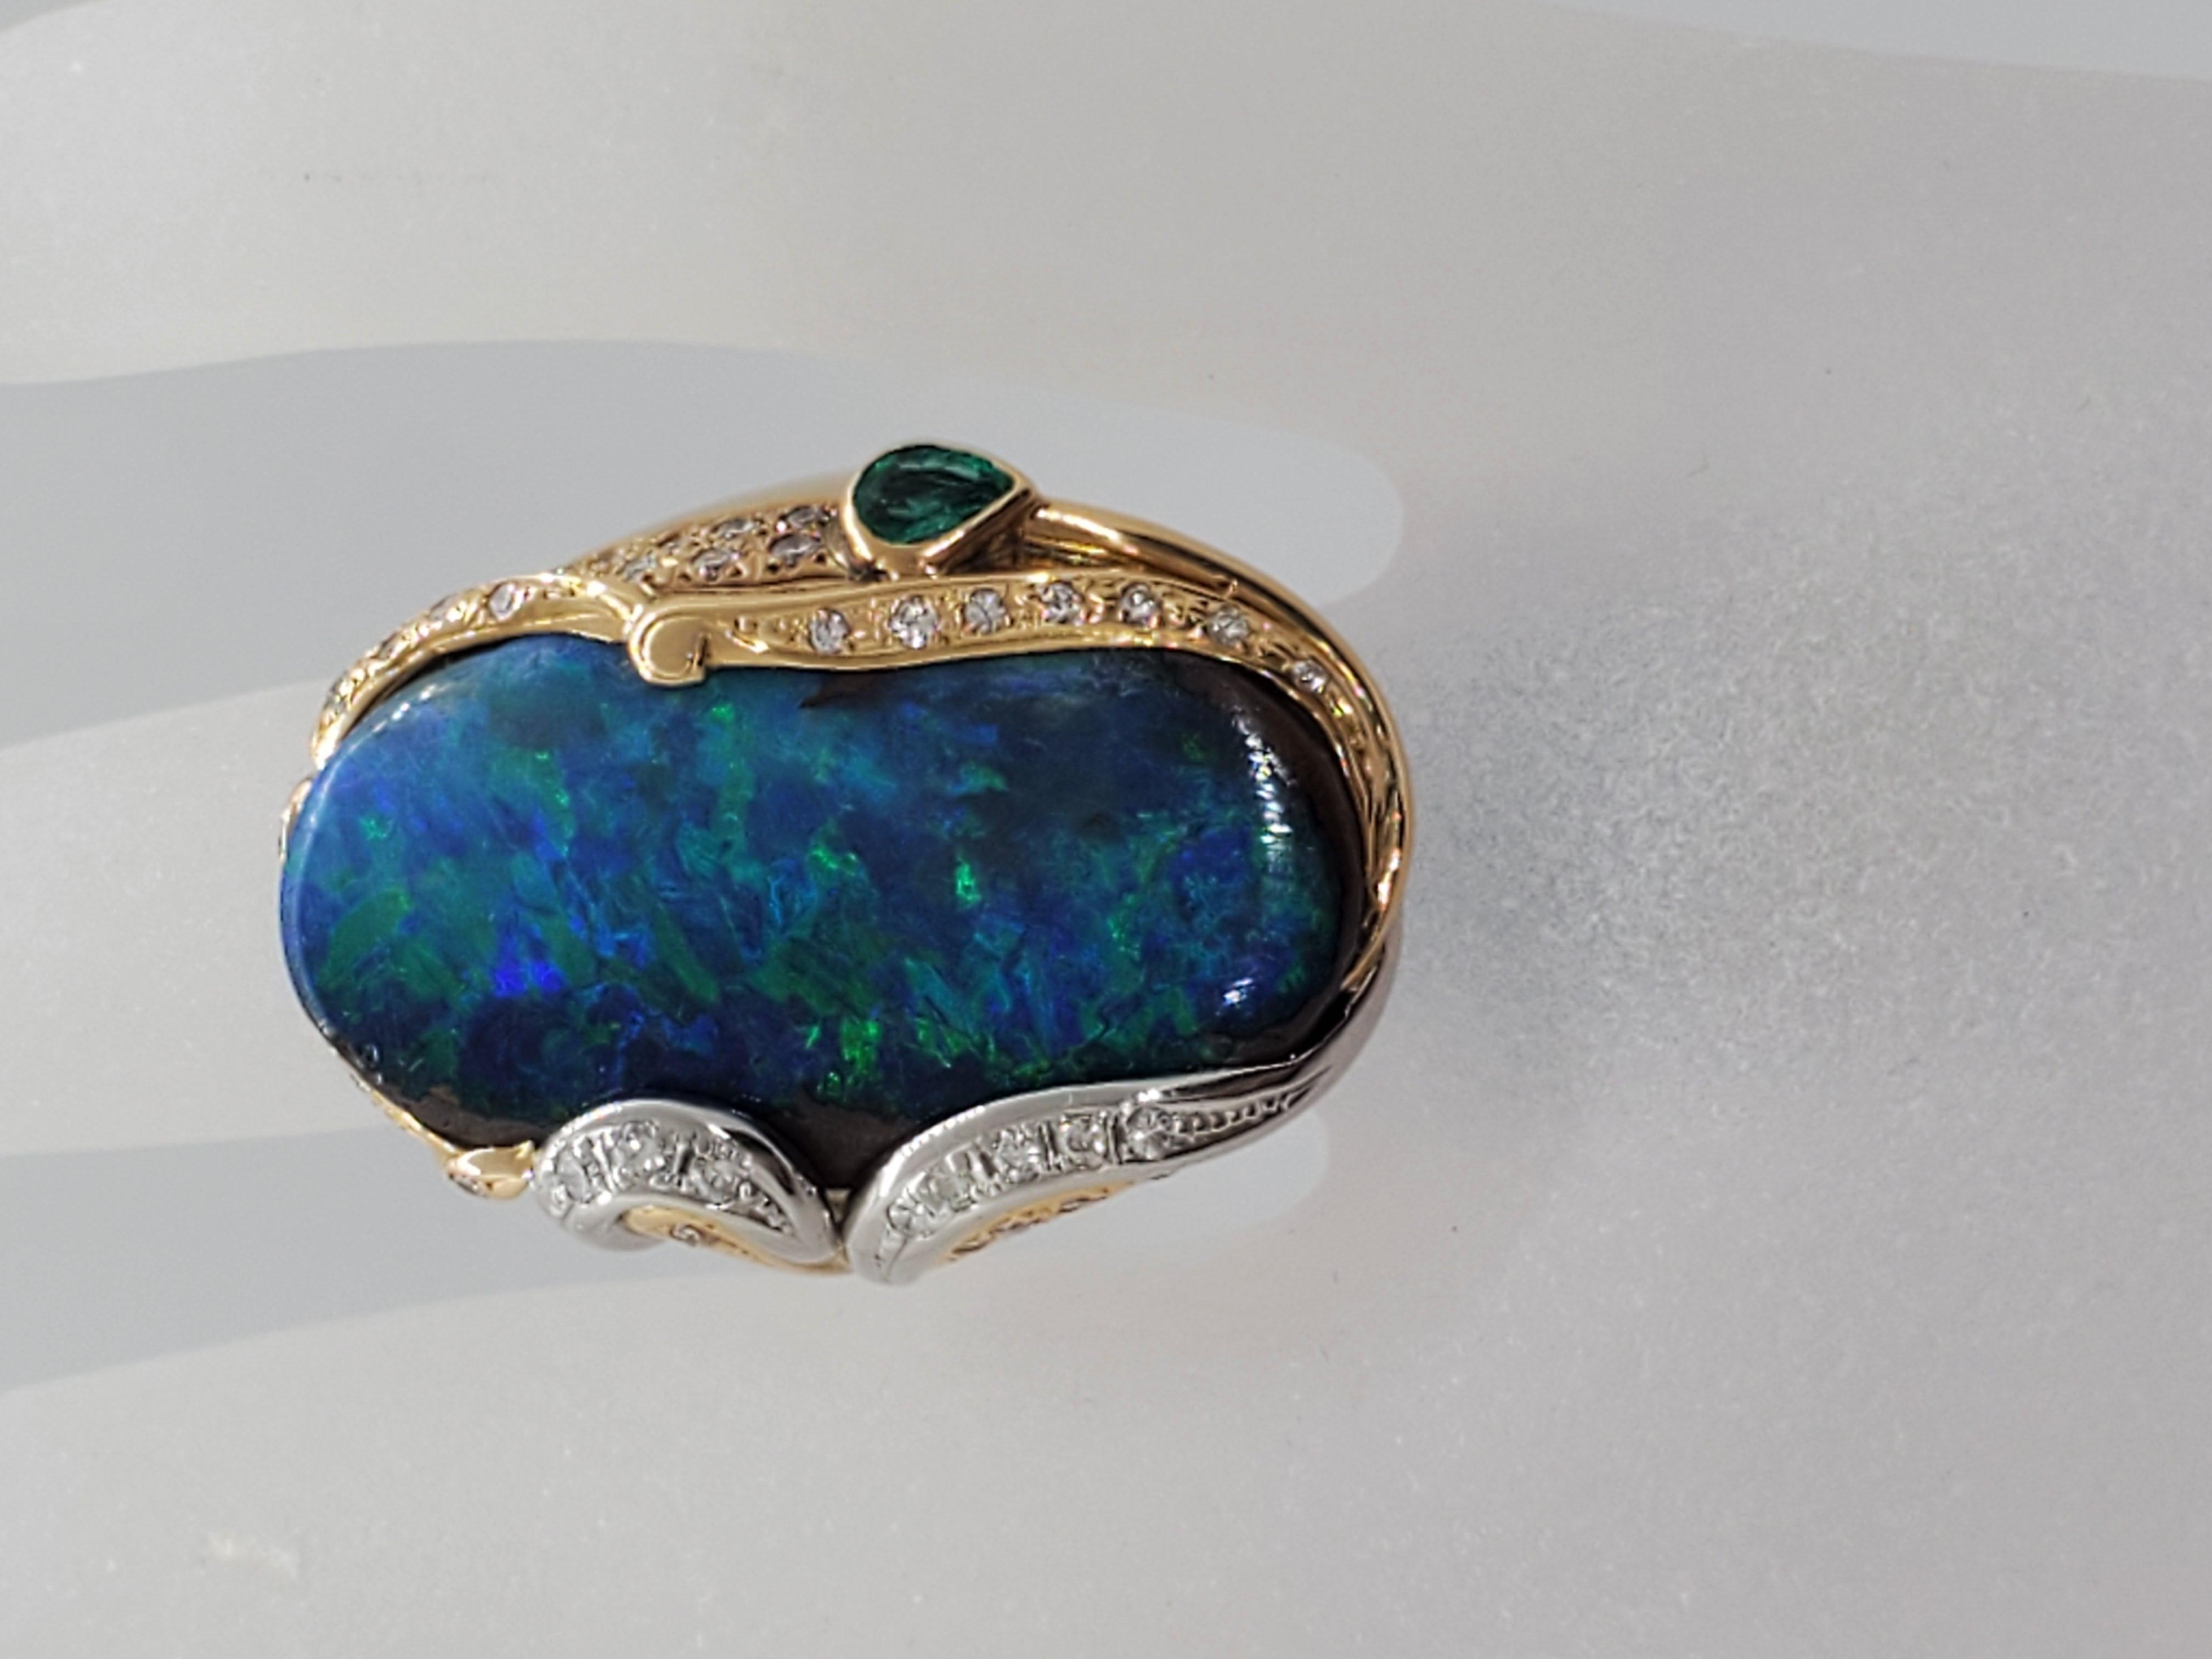 Boulder Opal Cabochon, Emerald, and White Diamond Ring in 18 Karat Gold 4